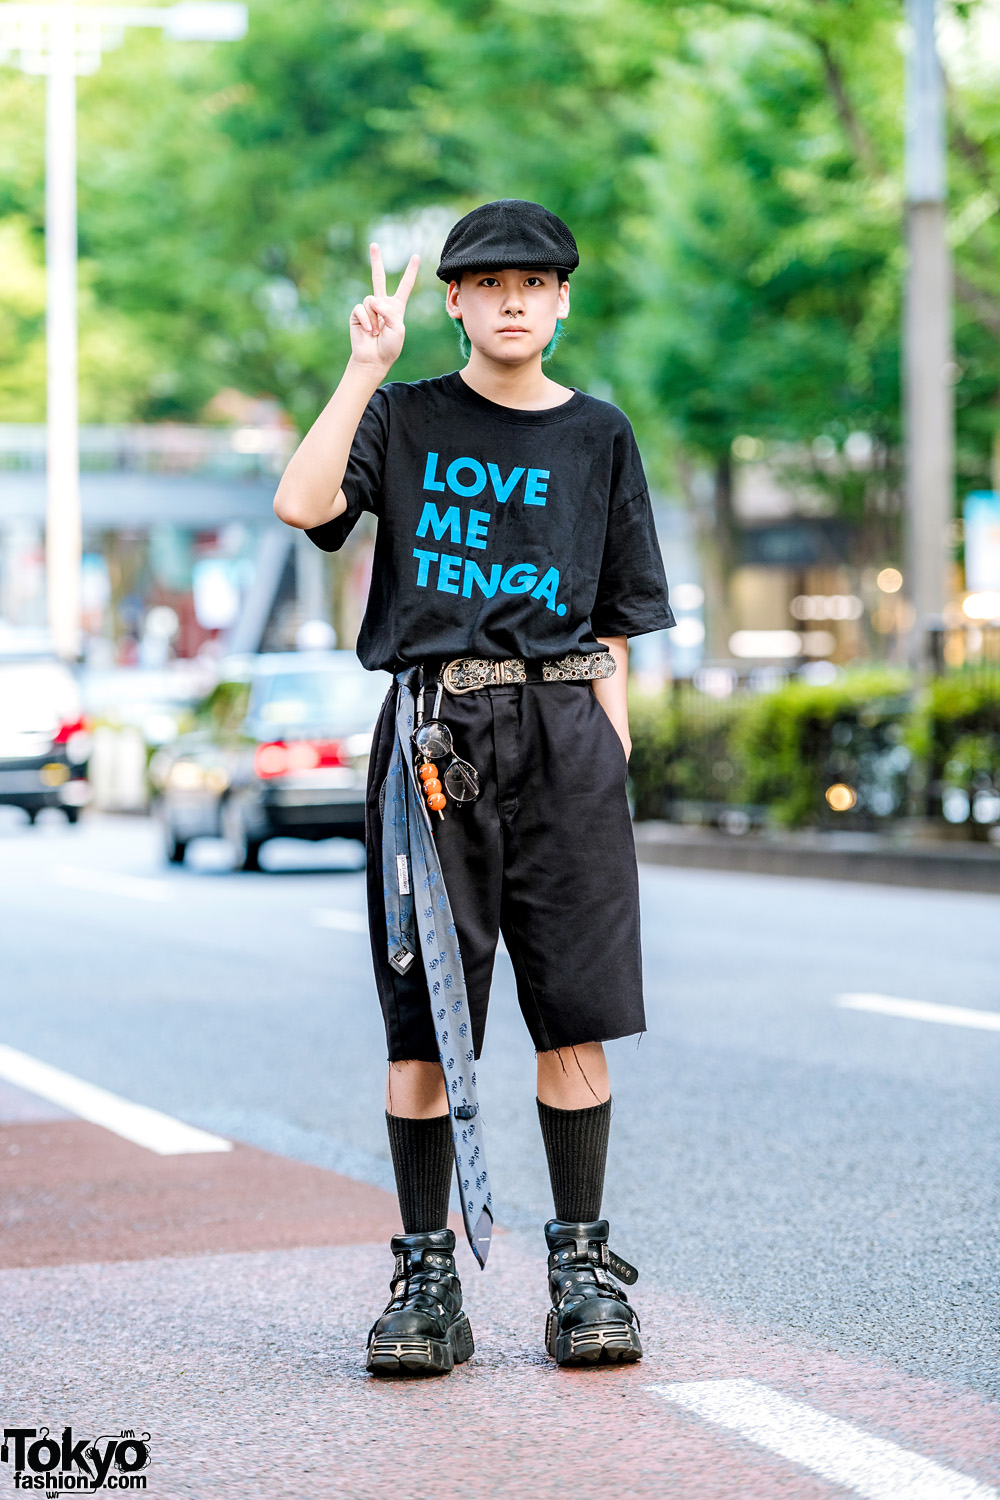 All Black Japanese Streetwear w/ Tenga T-Shirt, Dickies Shorts, New Rock Strap Shoes & BlackMeans Knuckle Duster Lighter Holder